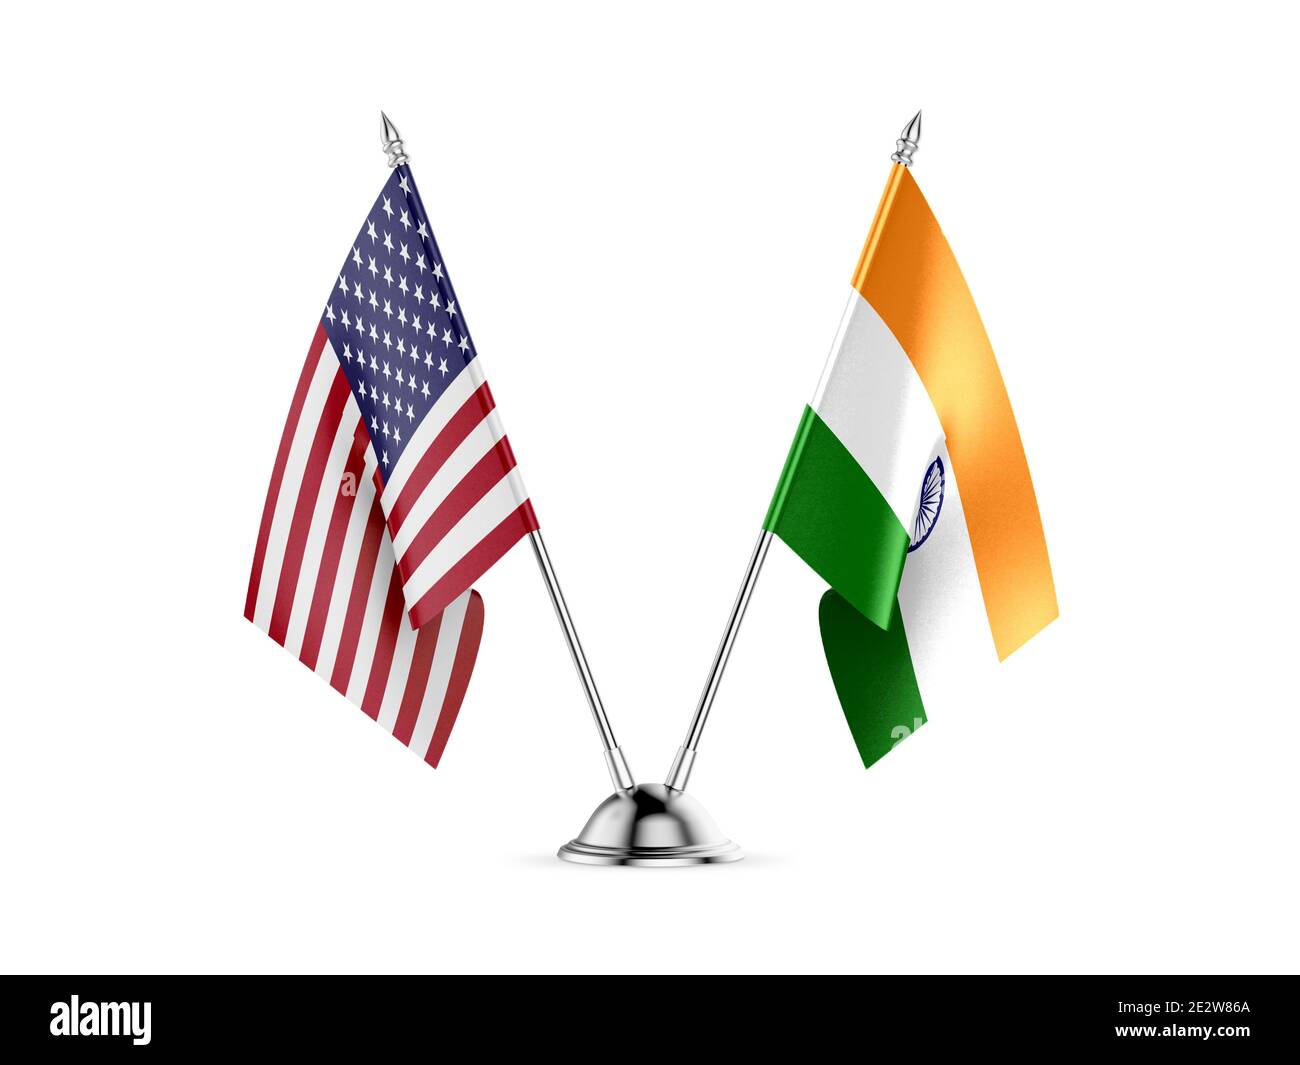 Desk flags, United States  America  and India, isolated on white background. 3d image Stock Photo